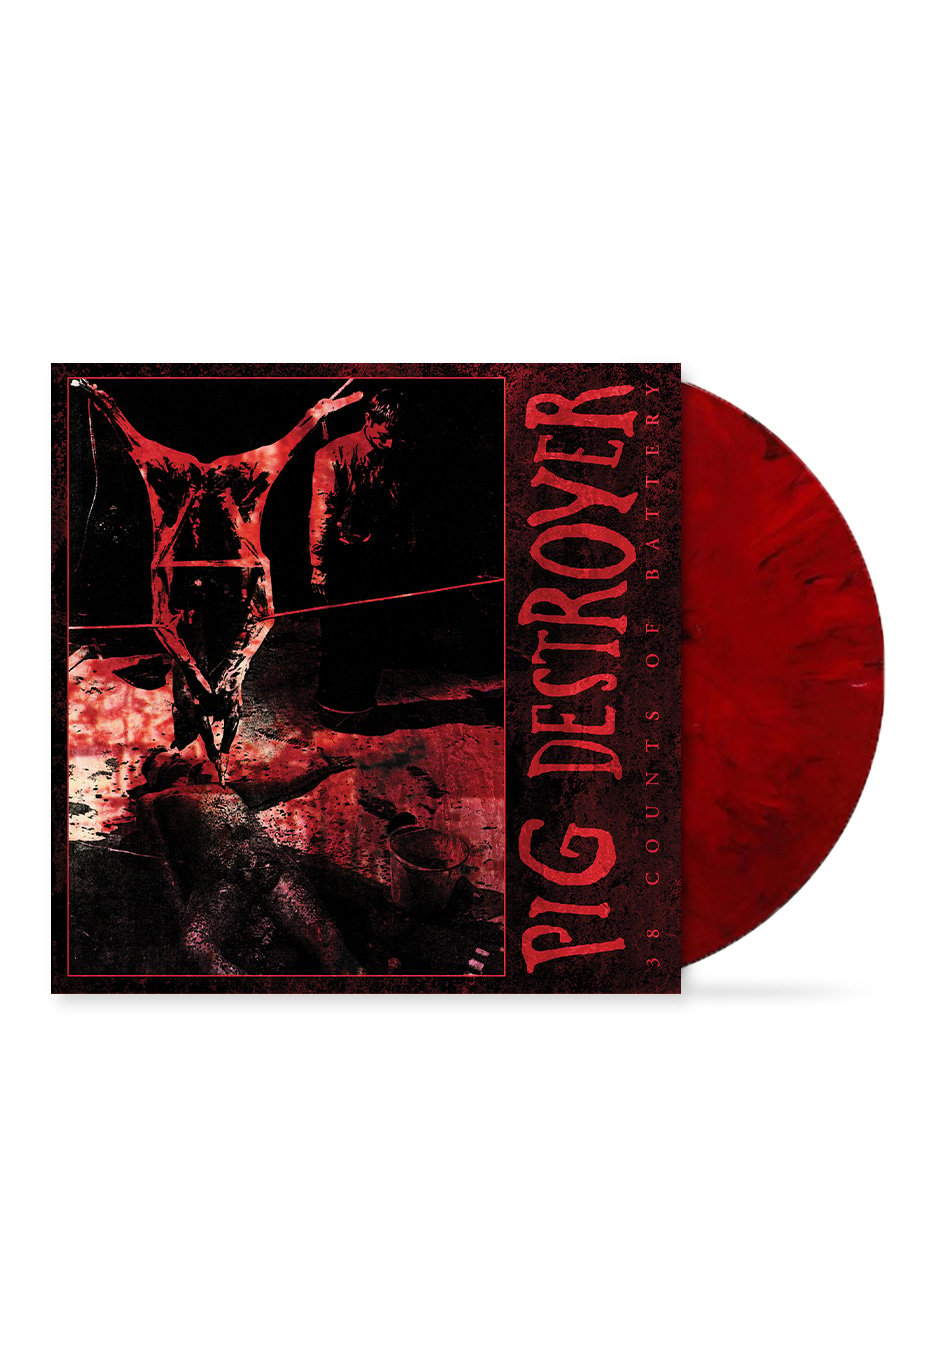 Pig Destroyer - 38 Counts Of Battery Red w/ Black Smoke - Colored Vinyl